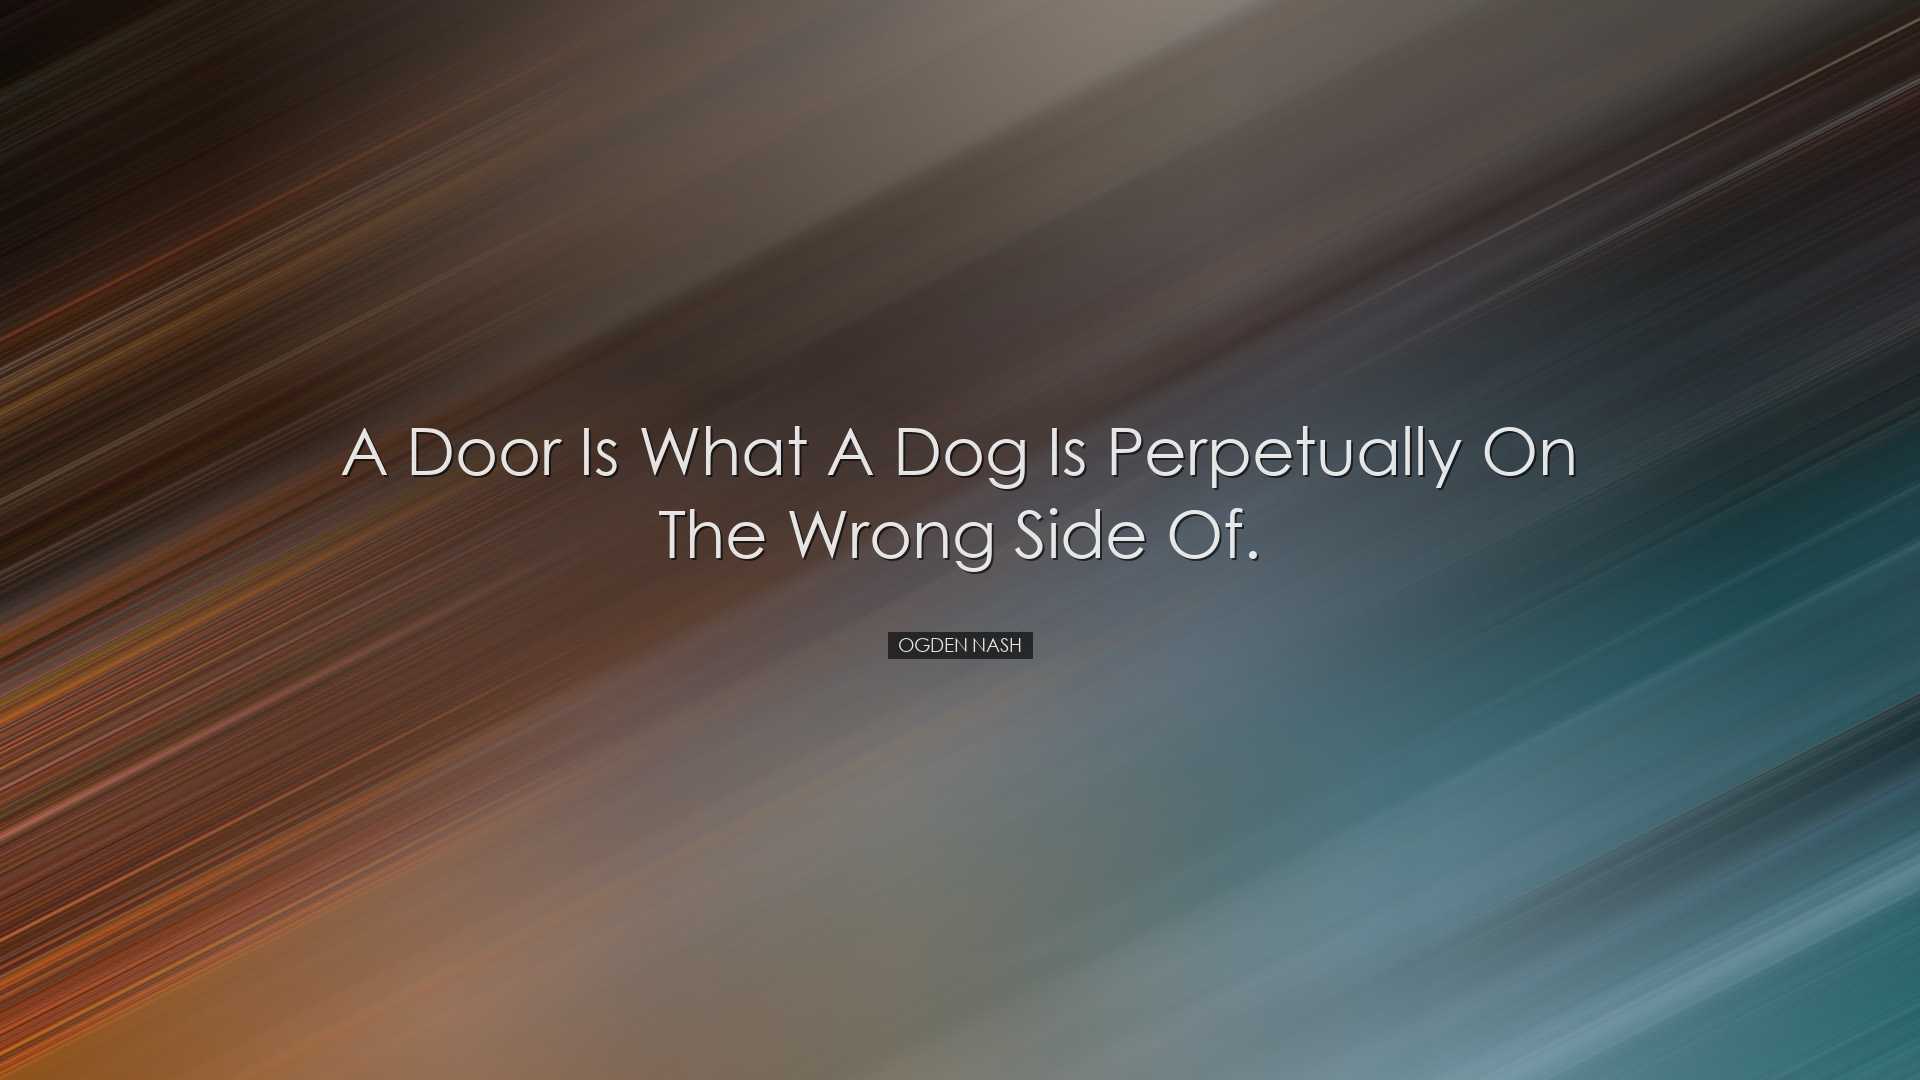 A door is what a dog is perpetually on the wrong side of. - Ogden